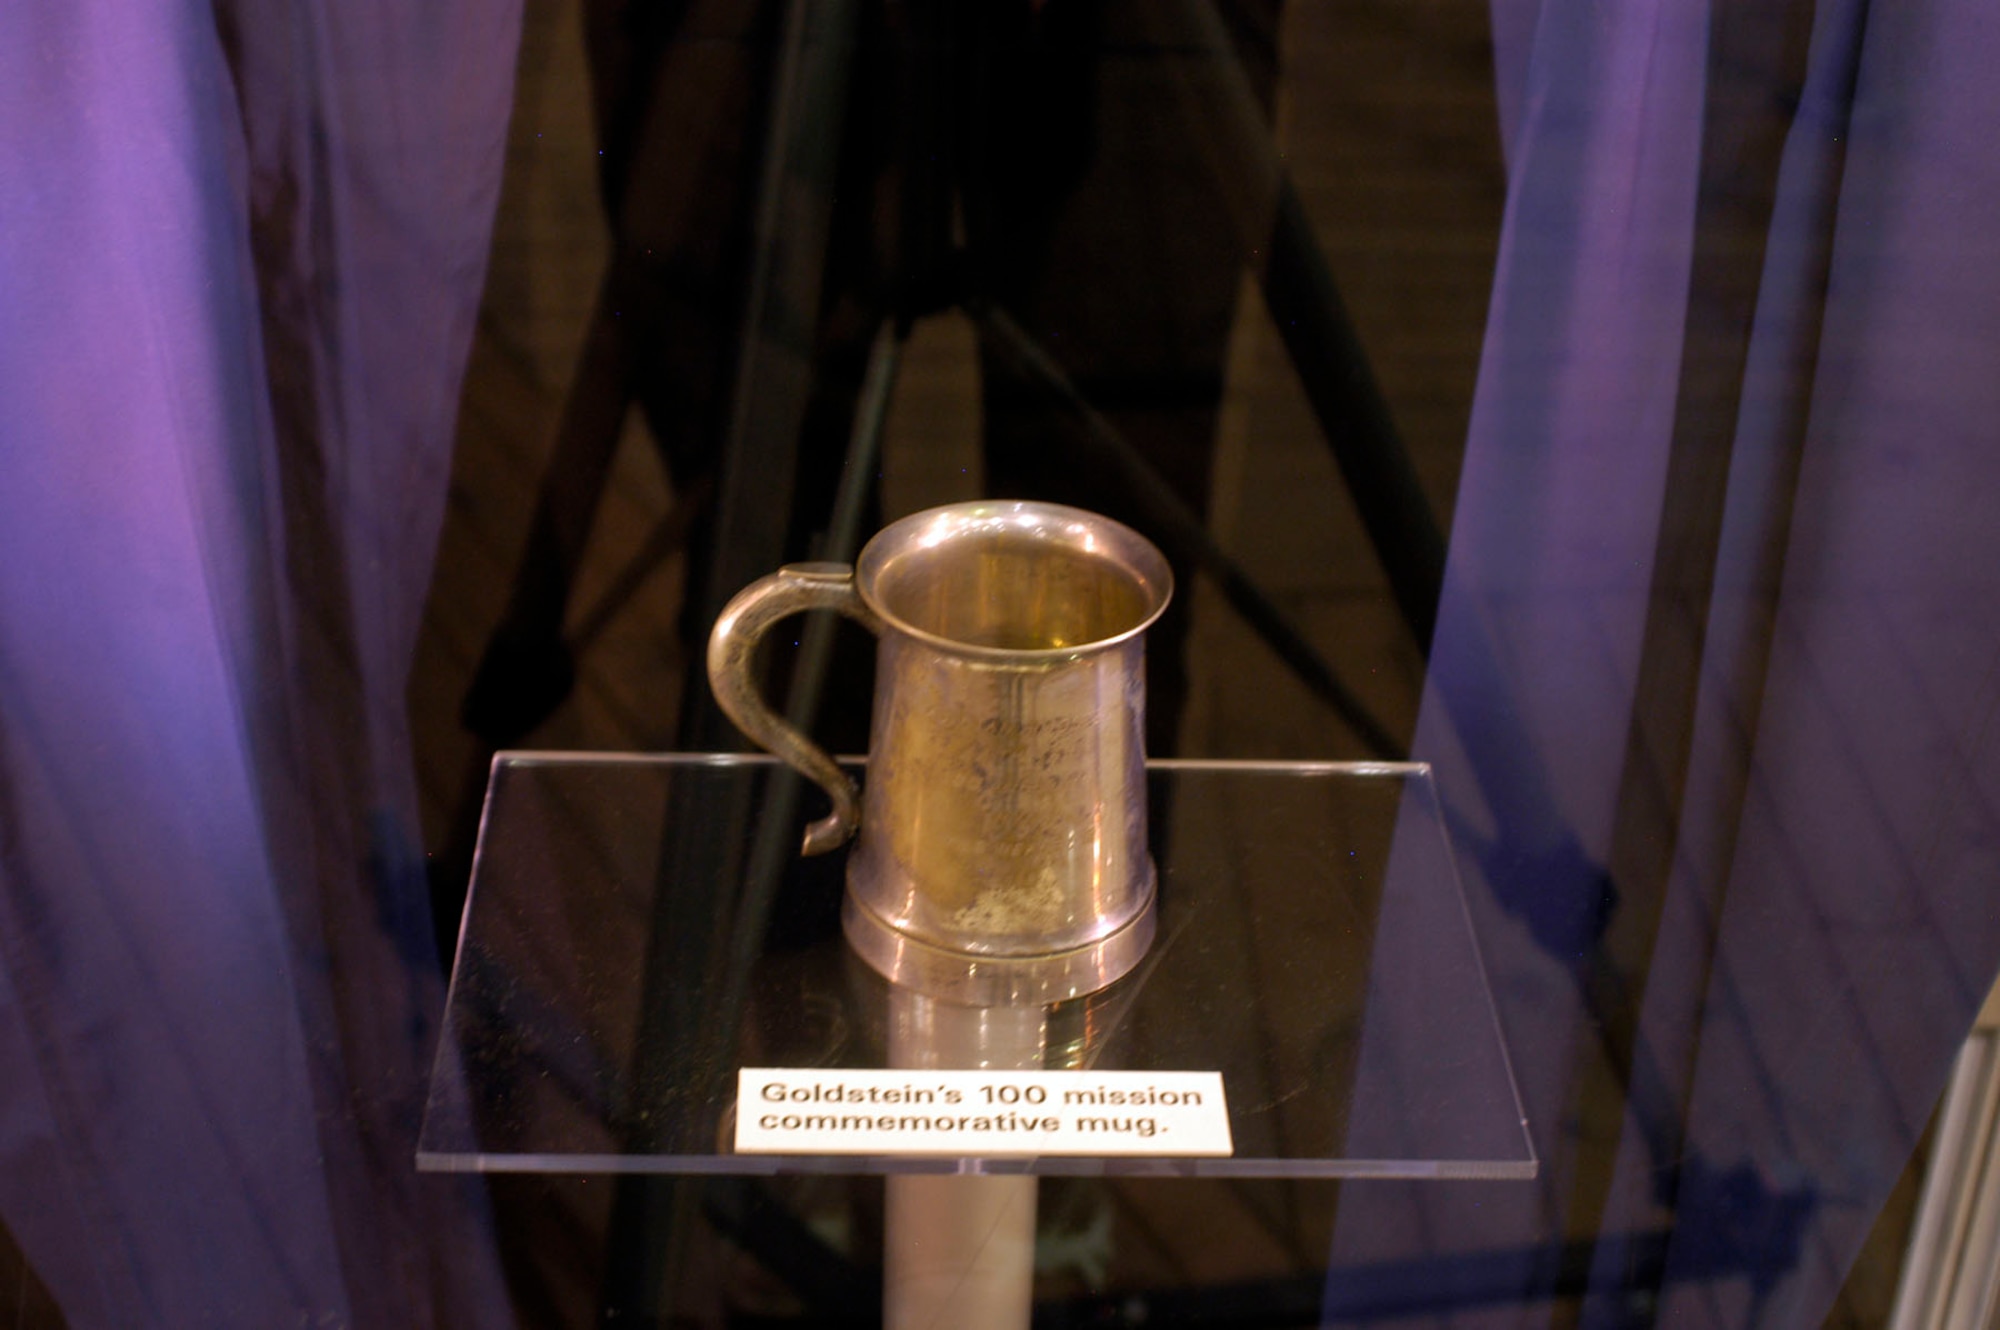 DAYTON, Ohio - Goldstein's 100 mission commemorative mug on display in the First In, Last Out: Wild Weasels vs. SAMs exhibit in the Southeast Asia War Gallery at the National Museum of the U.S. Air Force. (U.S. Air Force photo)